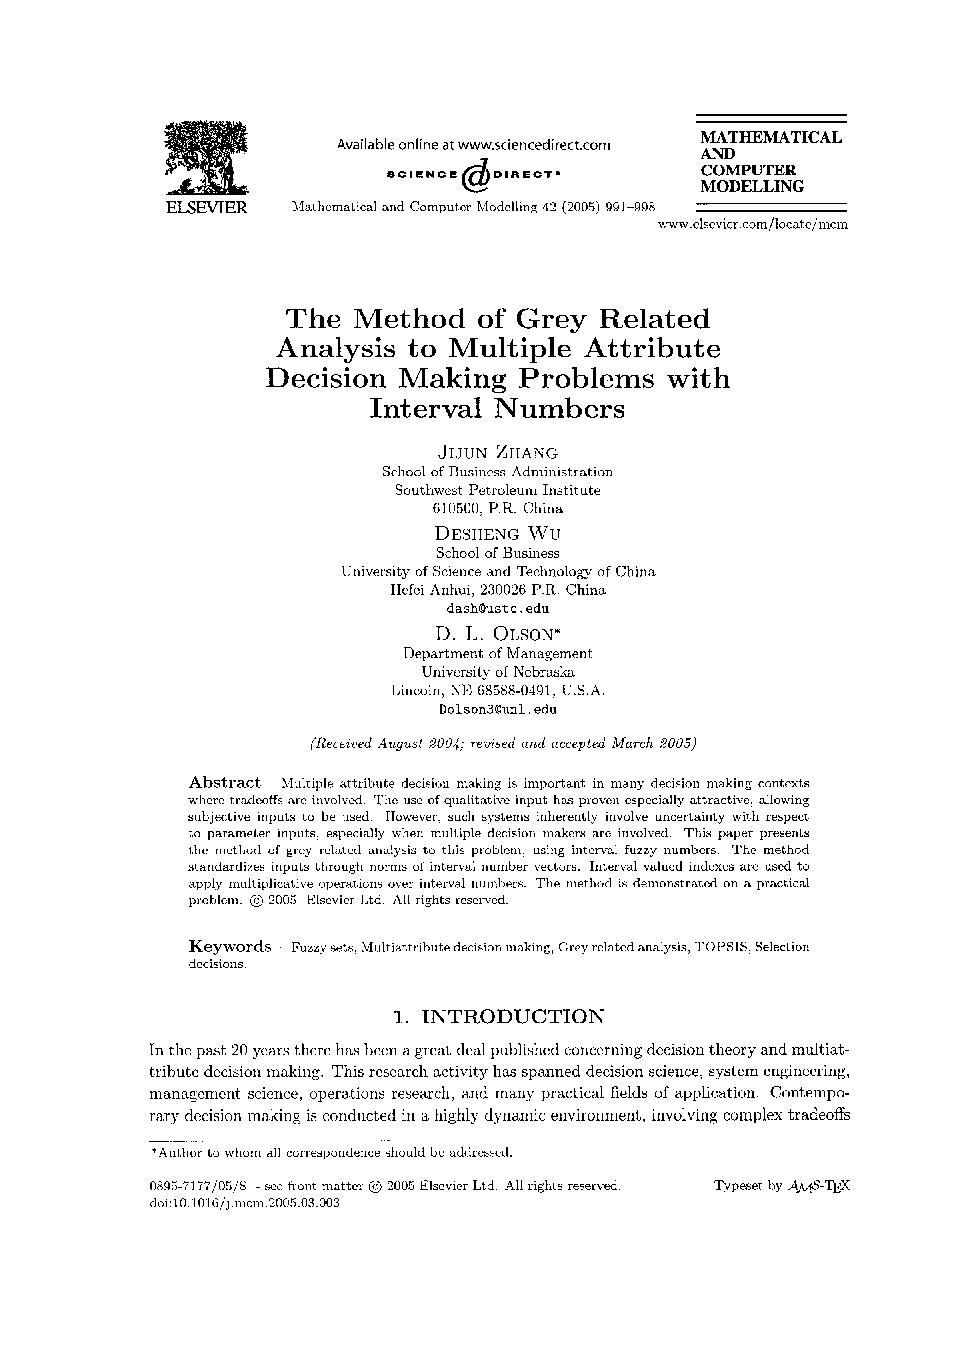 The method of grey related analysis to multiple attribute decision making problems with interval numbers